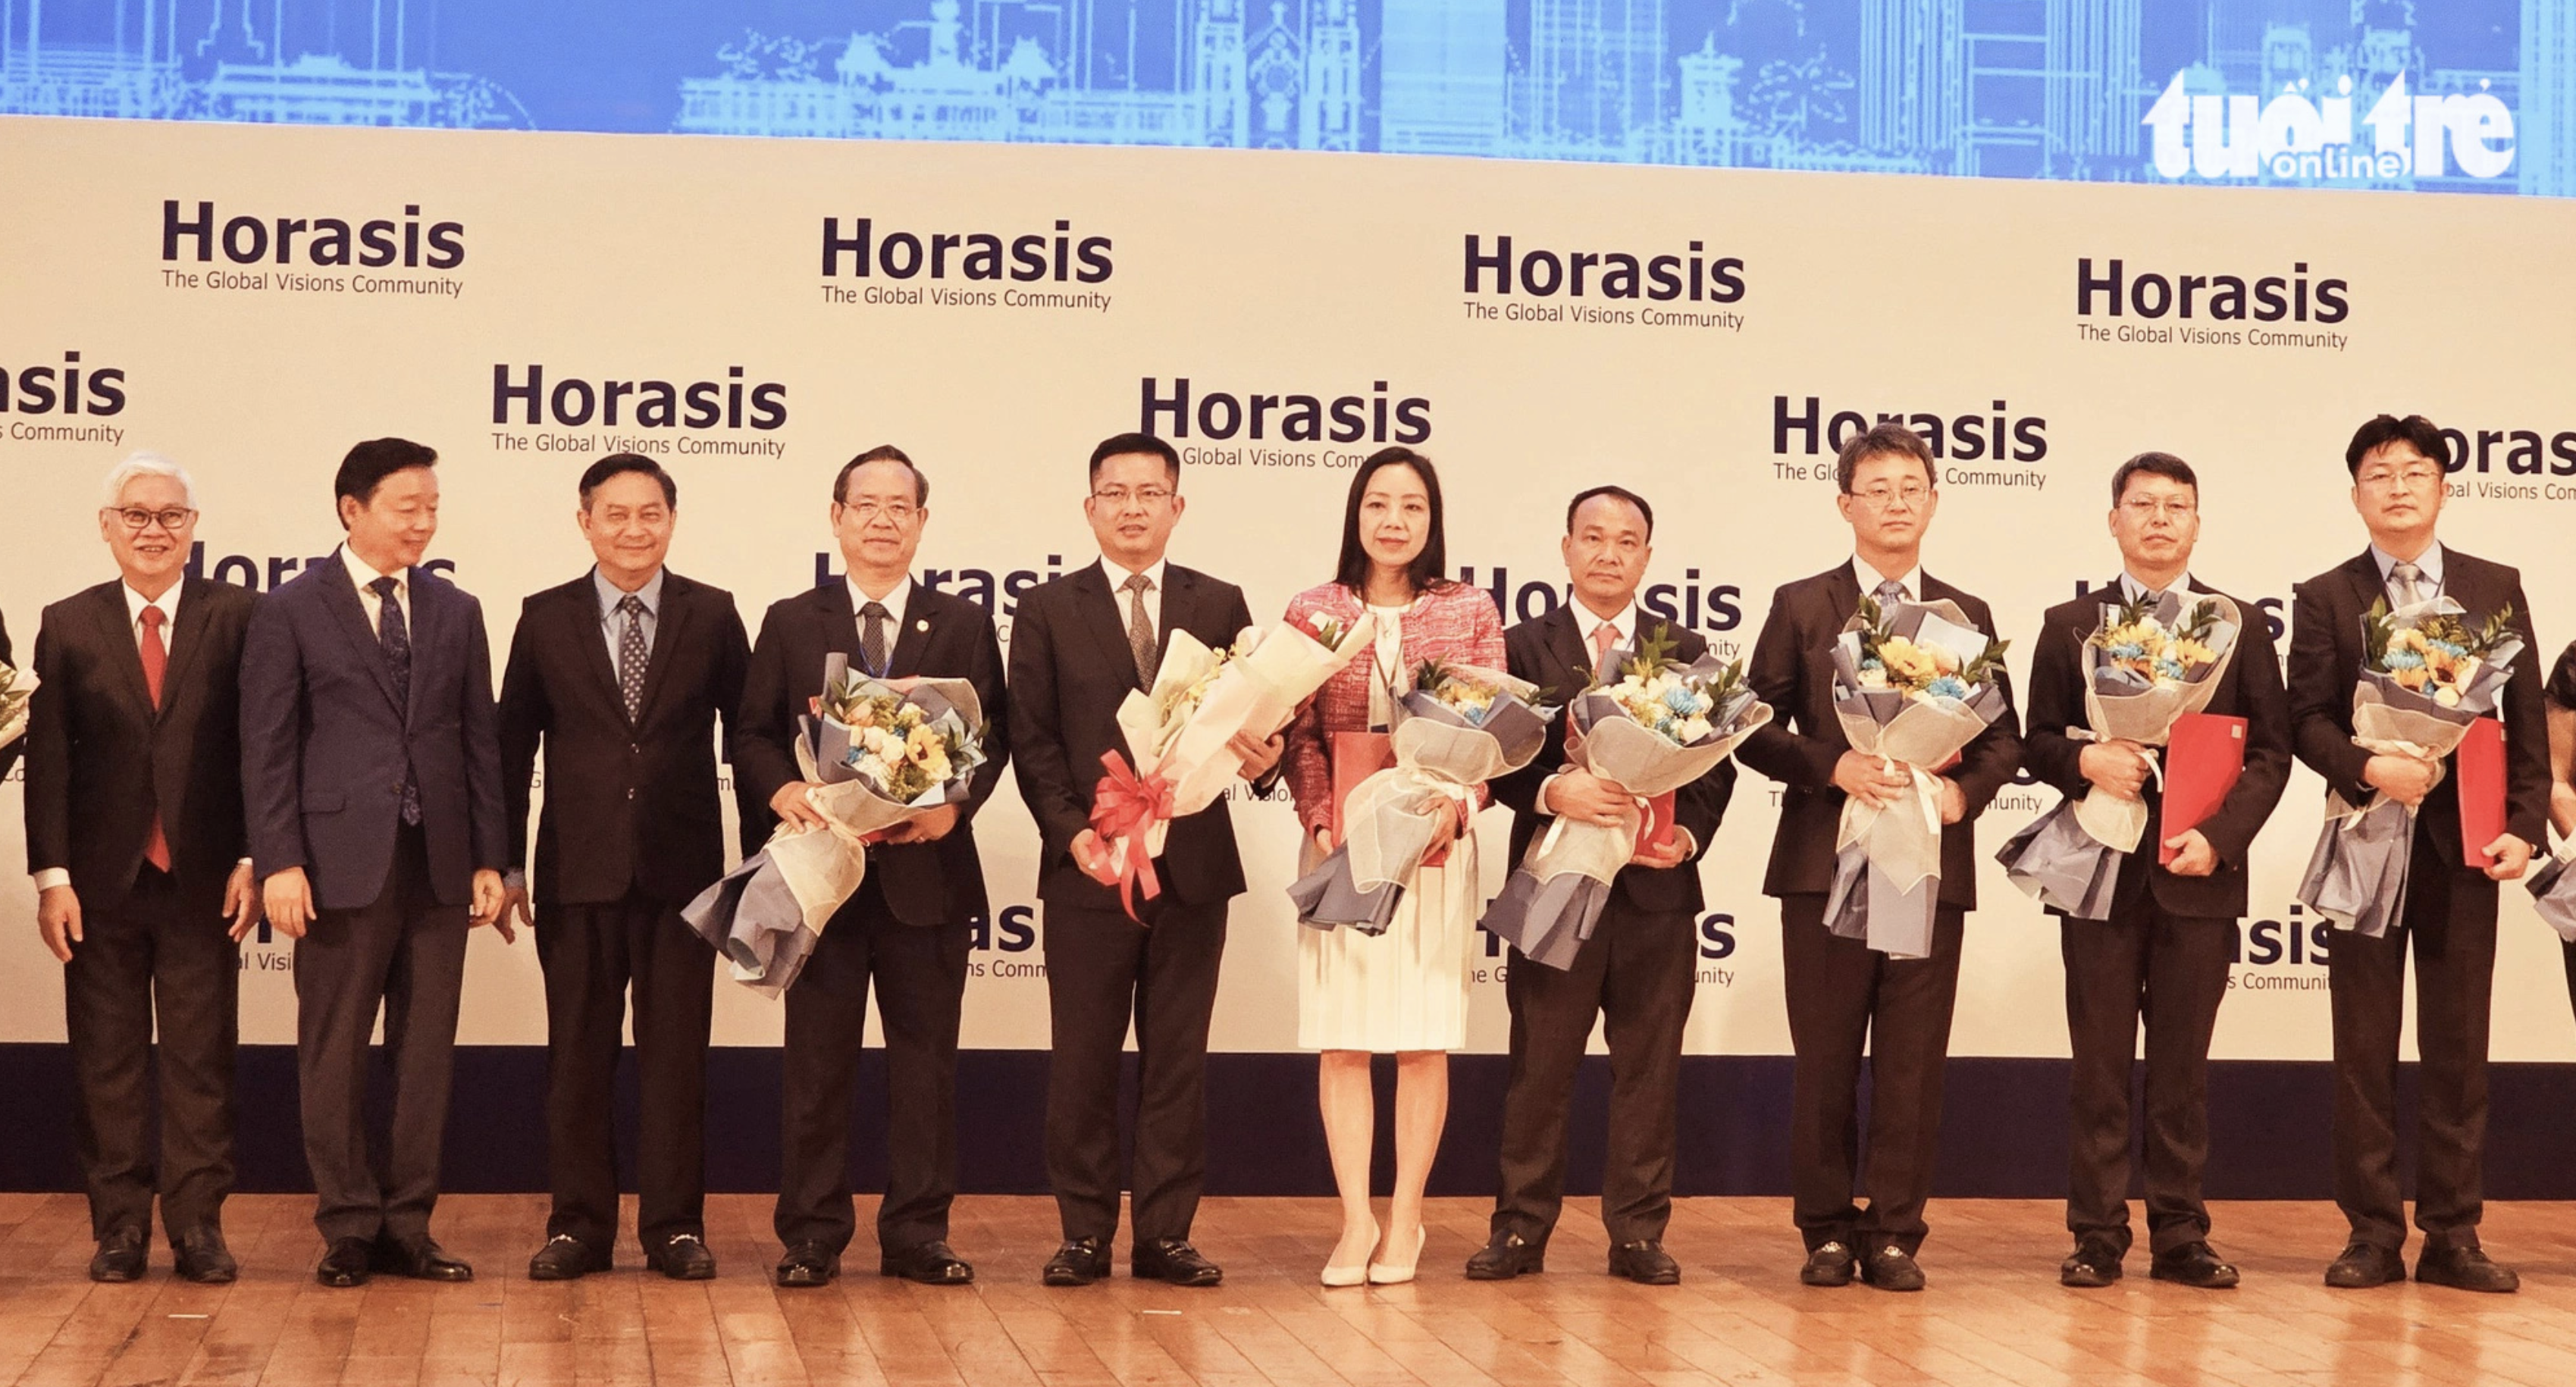 Many projects receive investment certificates at Horasis China Meeting in Vietnam’s Binh Duong